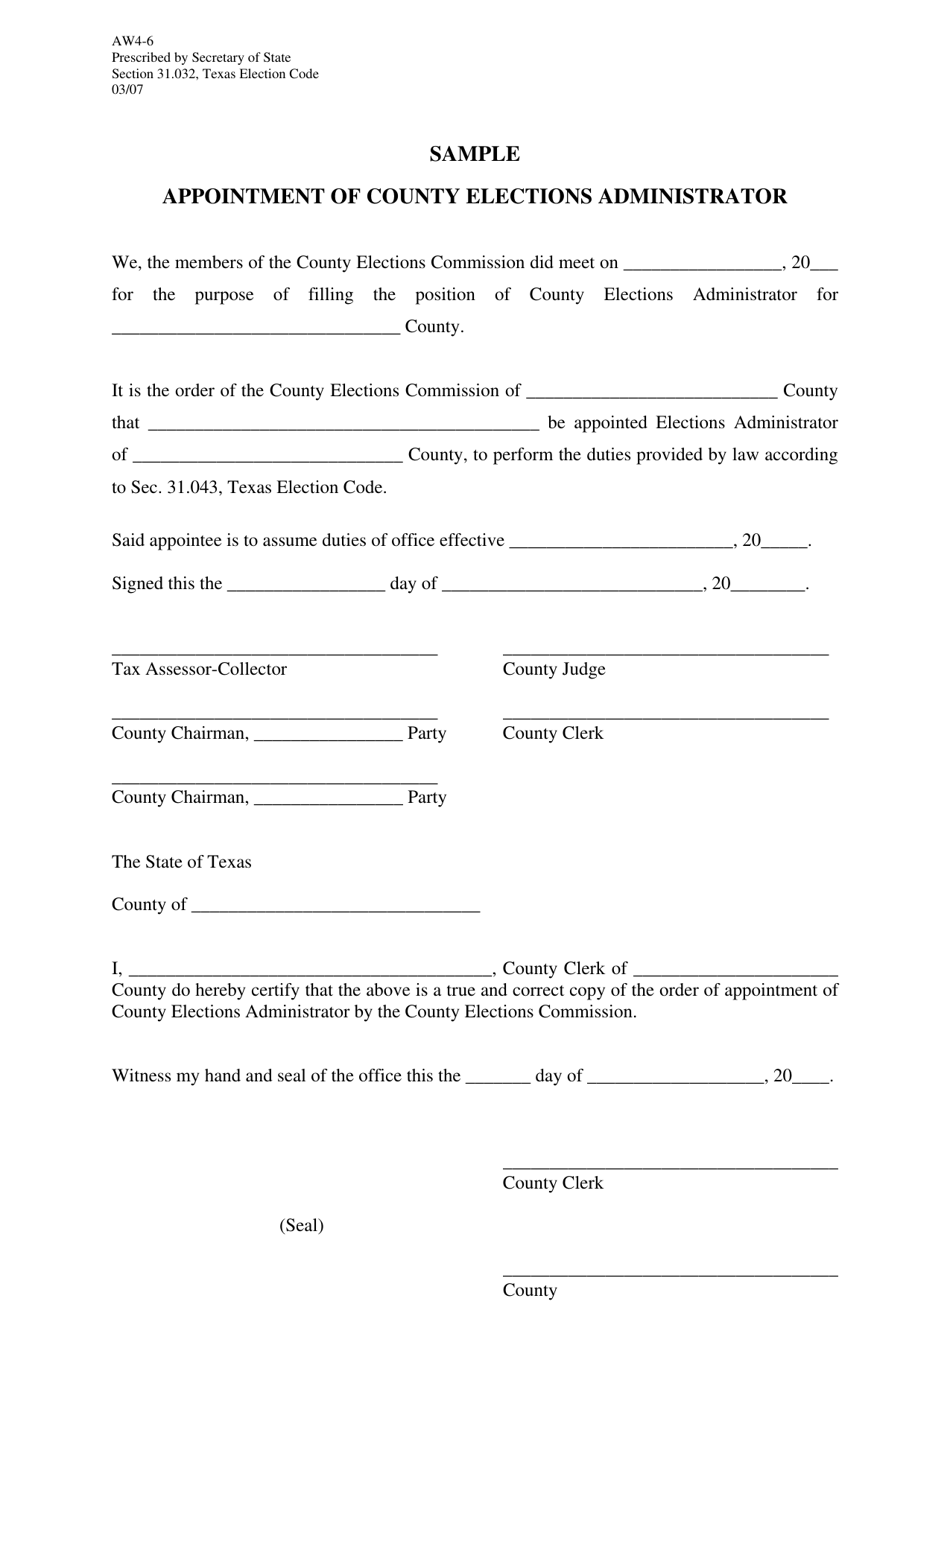 Form AW4-6 Appointment of County Elections Administrator - Texas, Page 1